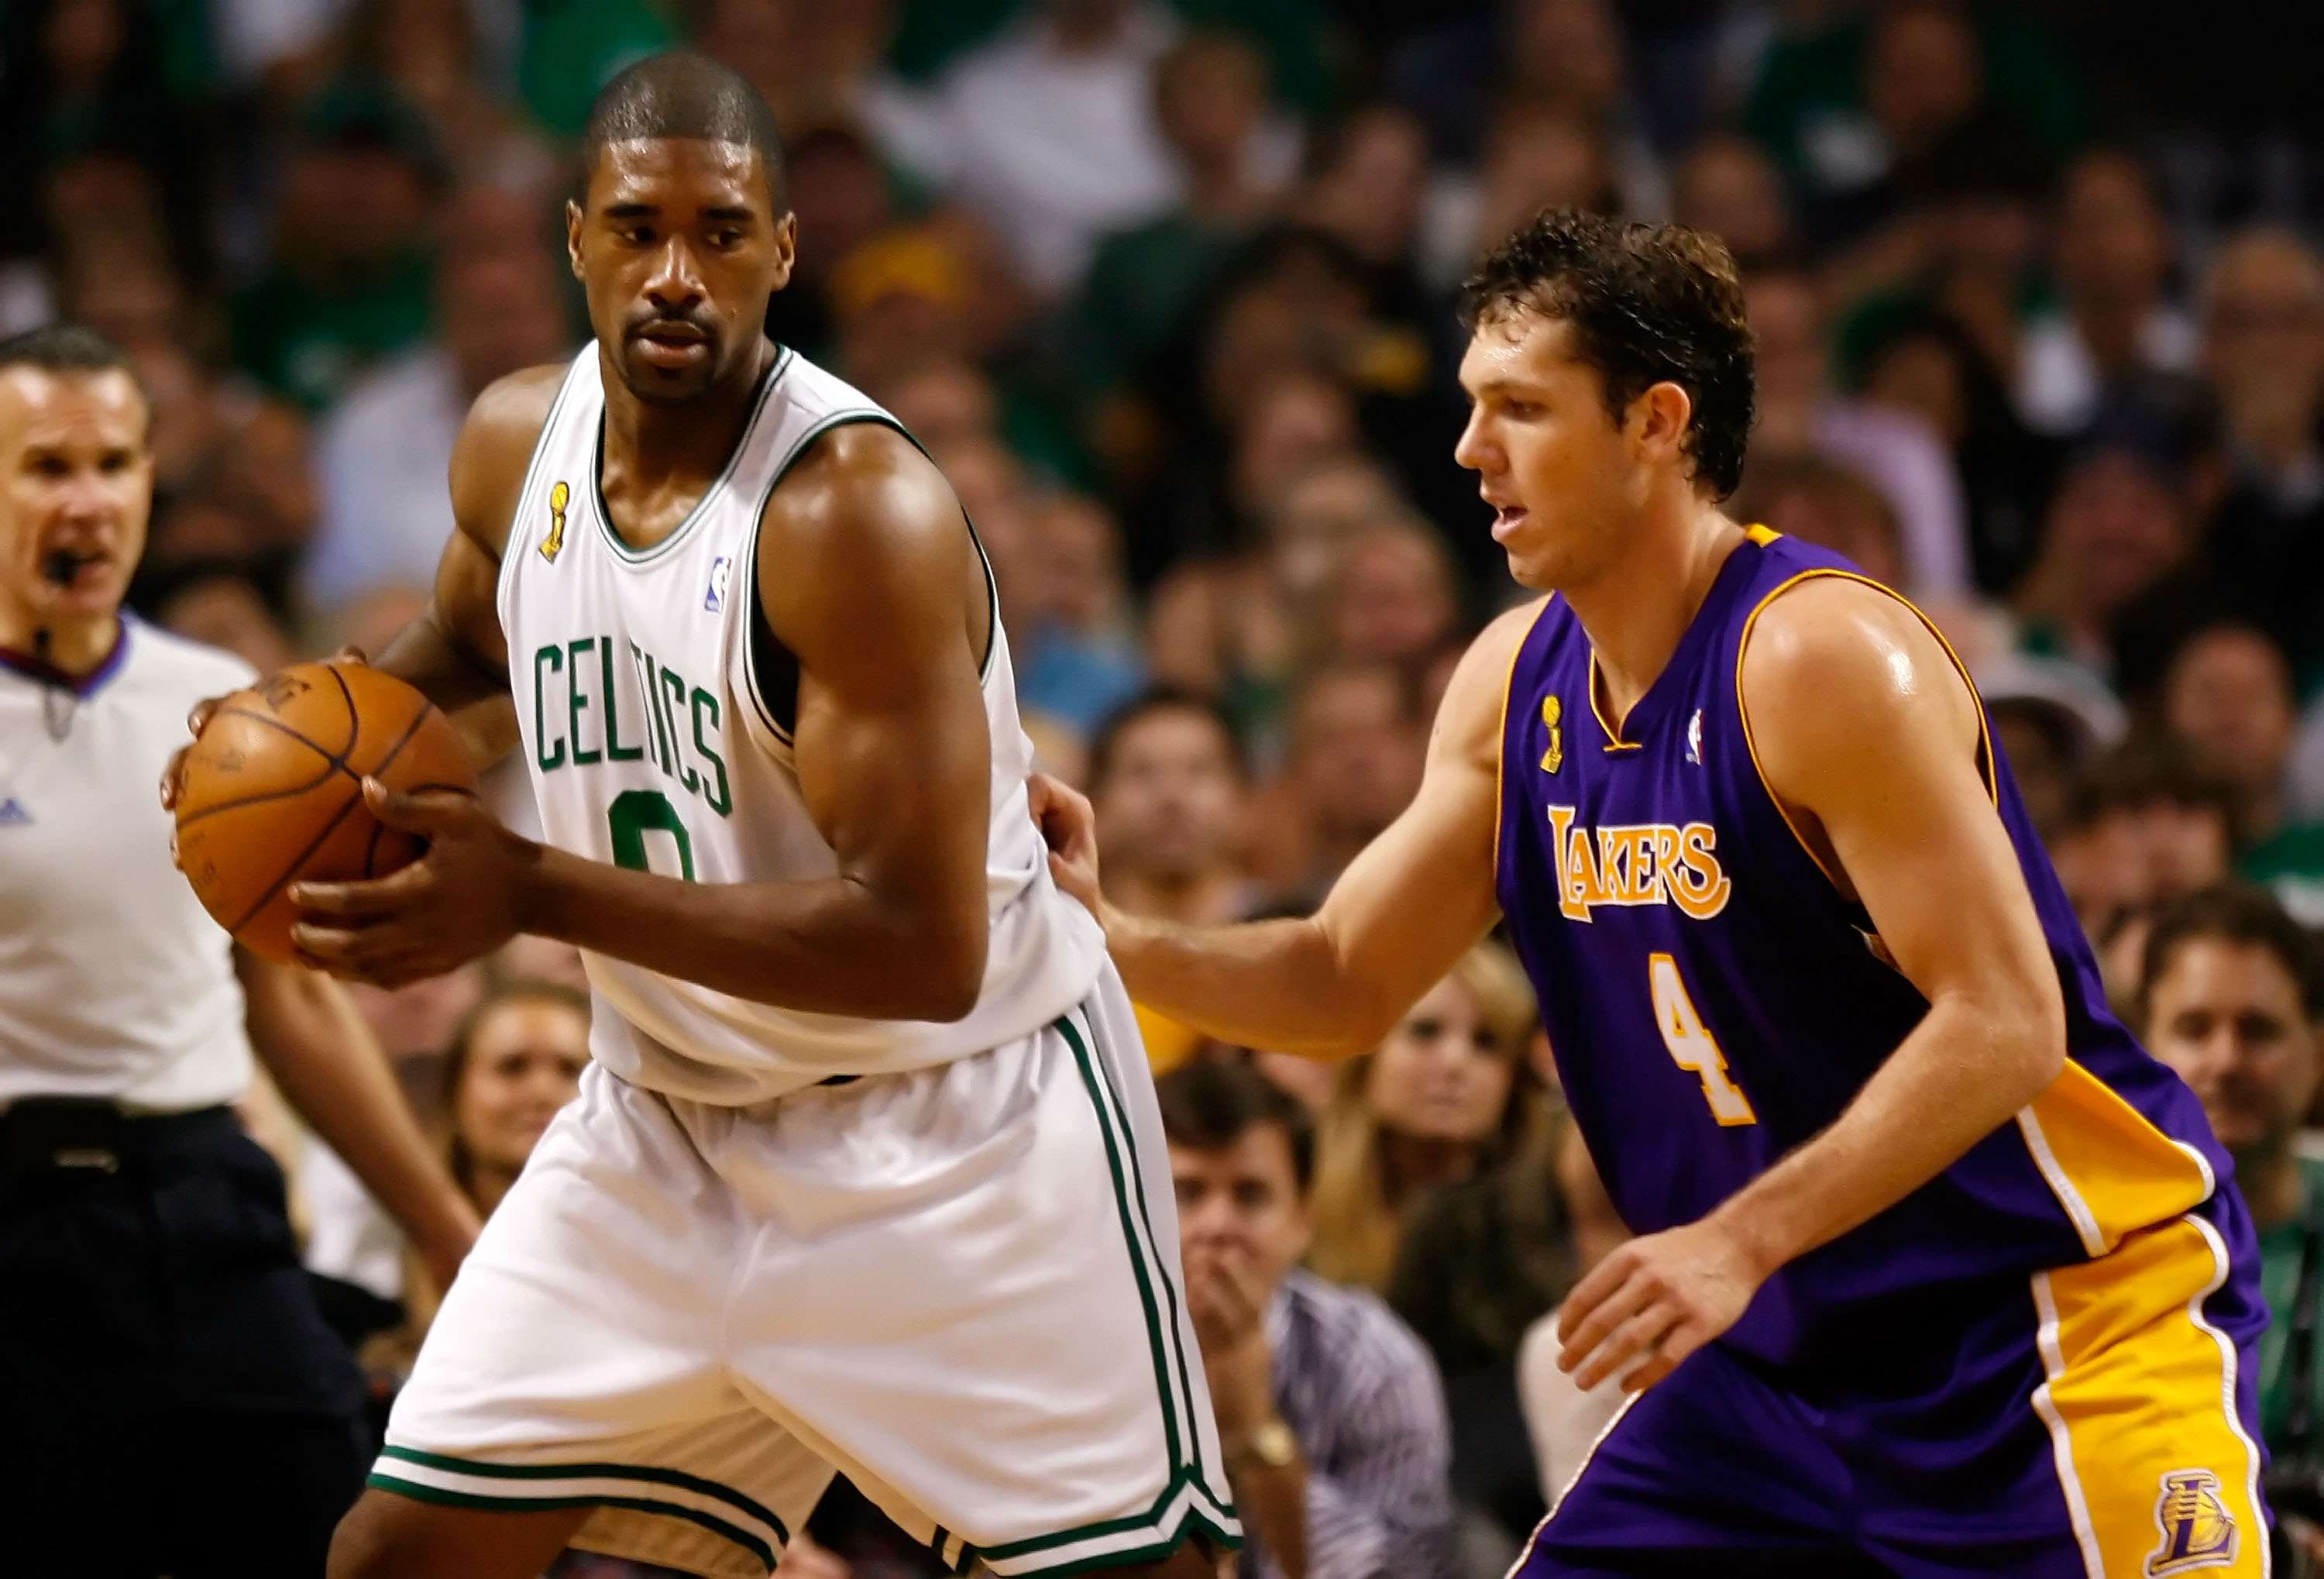 Boston Celtics: Leon Powe Reflects on His Epic Game 2 Performance vs. Kobe Bryant and the Lakers in the 2008 NBA Finals